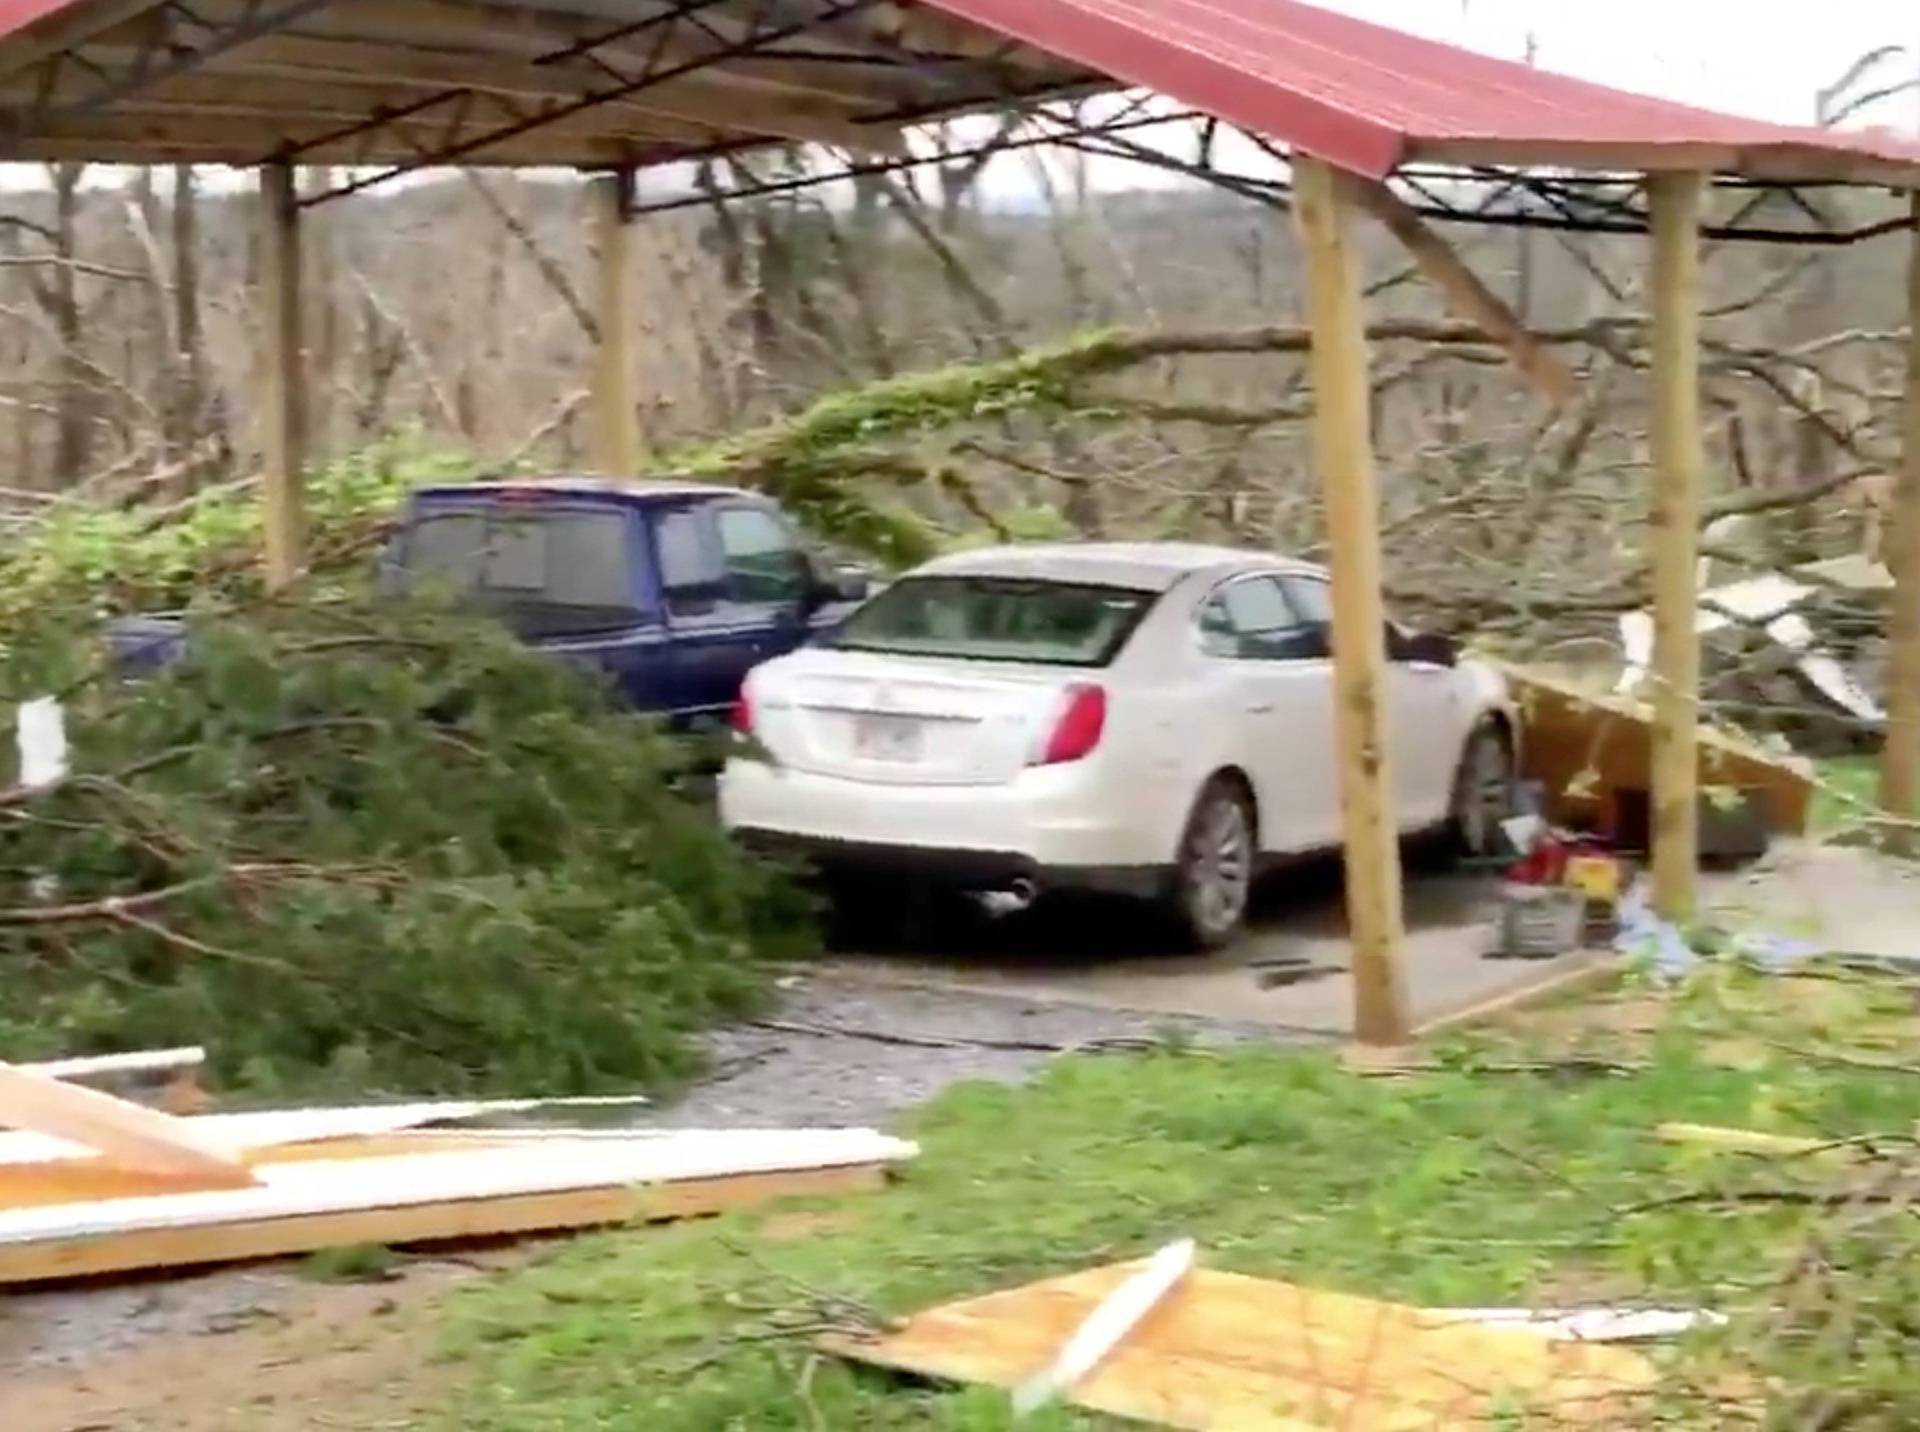 Damaged vehicles in a shelter next to debris following a tornado in Beauregard, Alabama, U.S. in this March 3, 2019 still image obtained from social media video